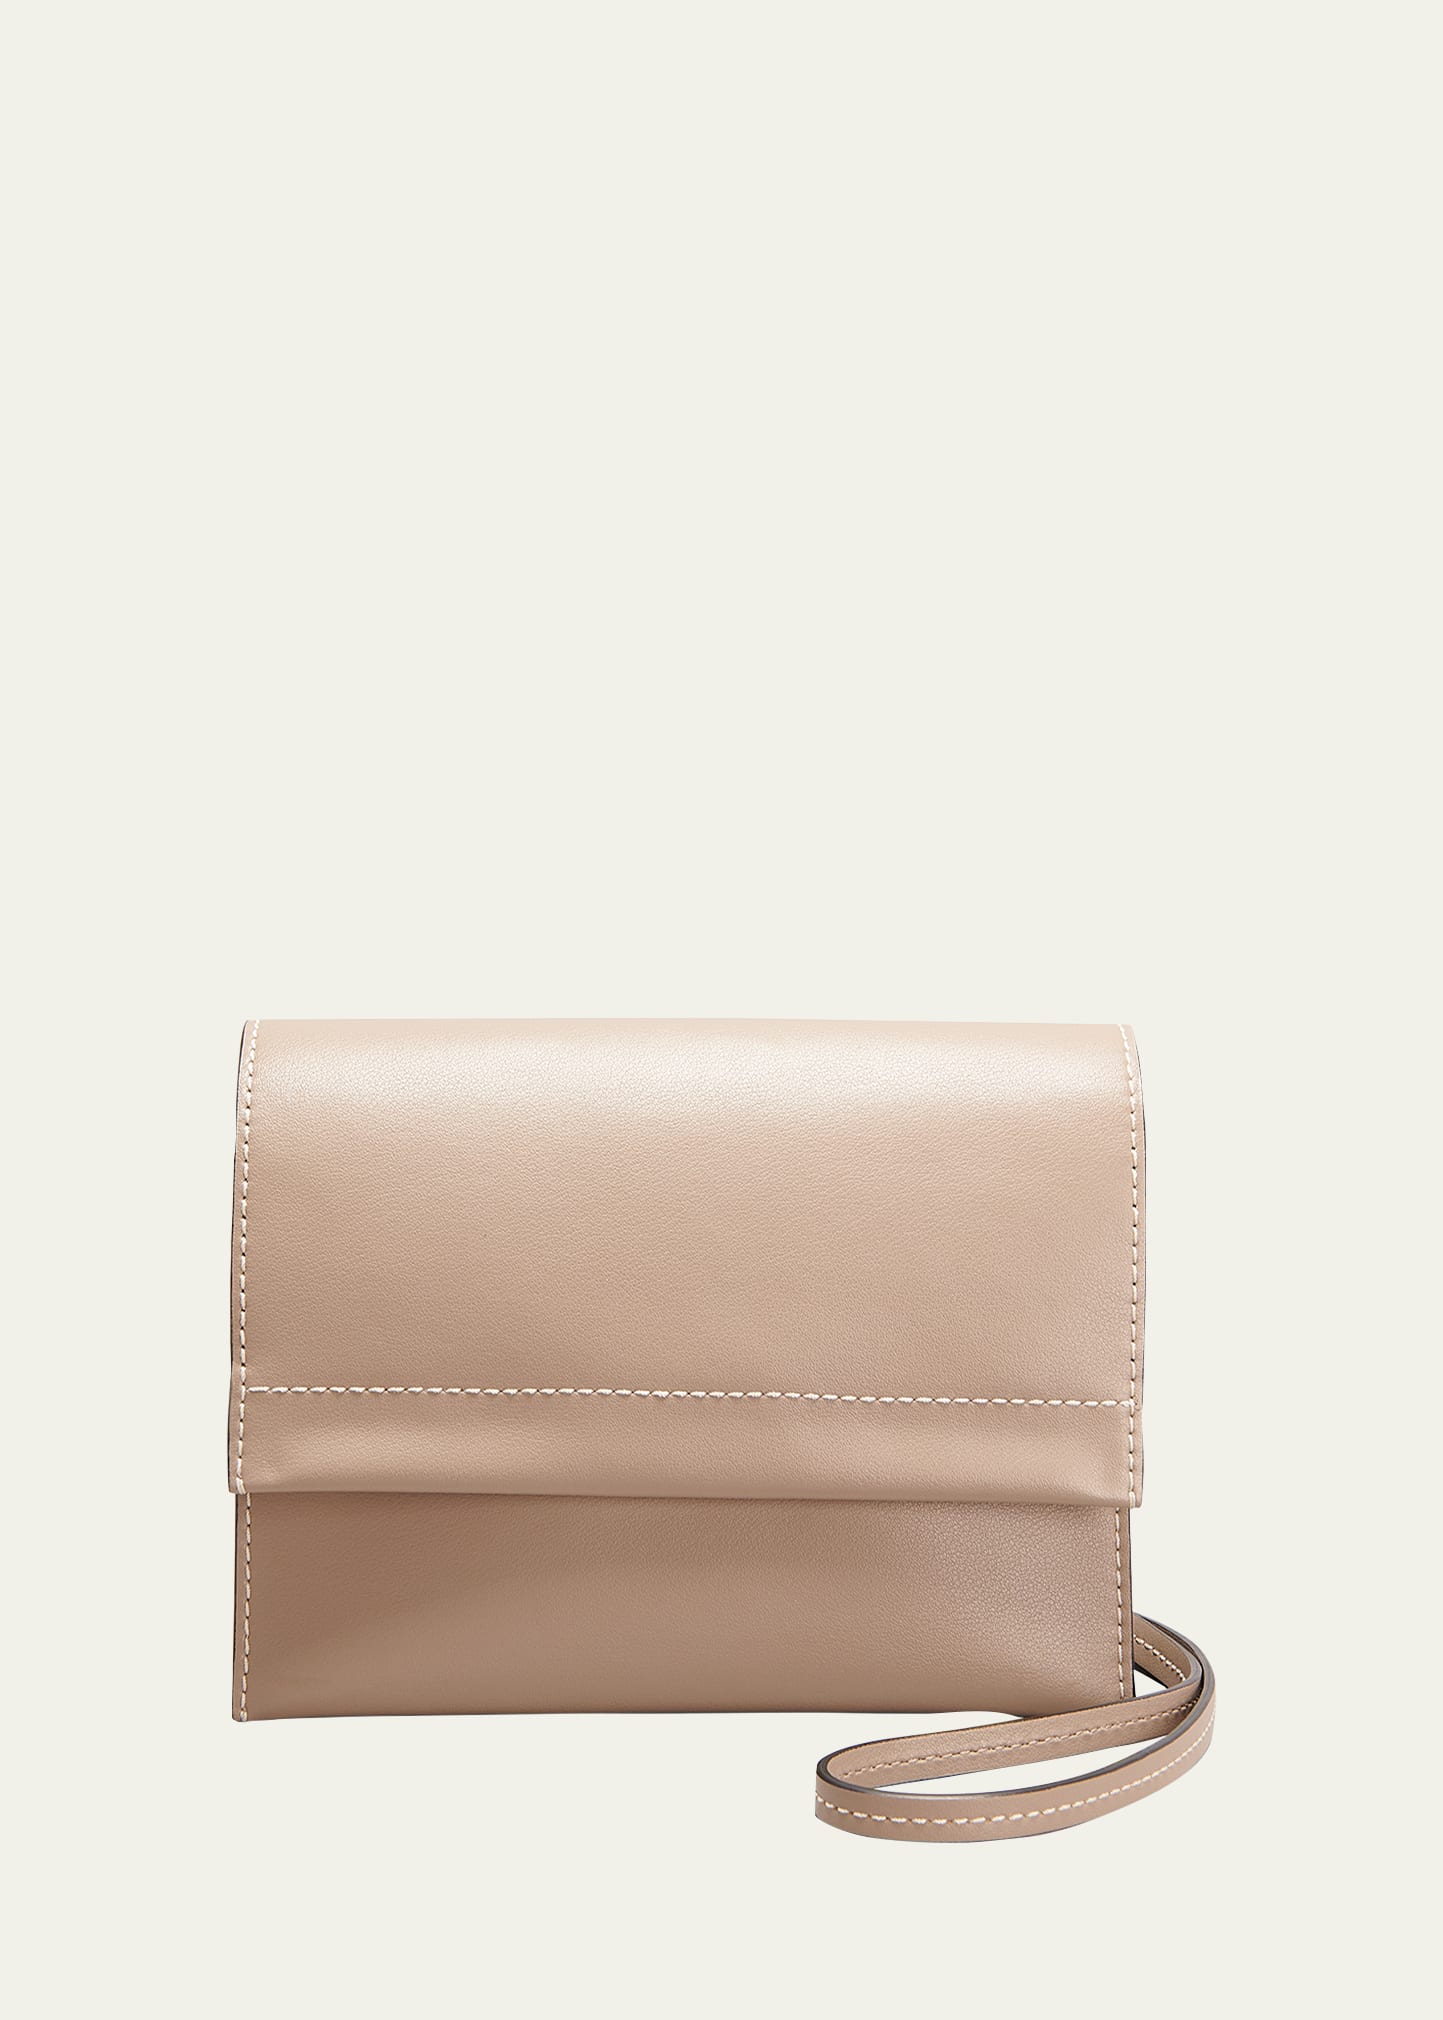 Shop Proenza Schouler White Label Accordion Flap Leather Crossbody Bag In Clay